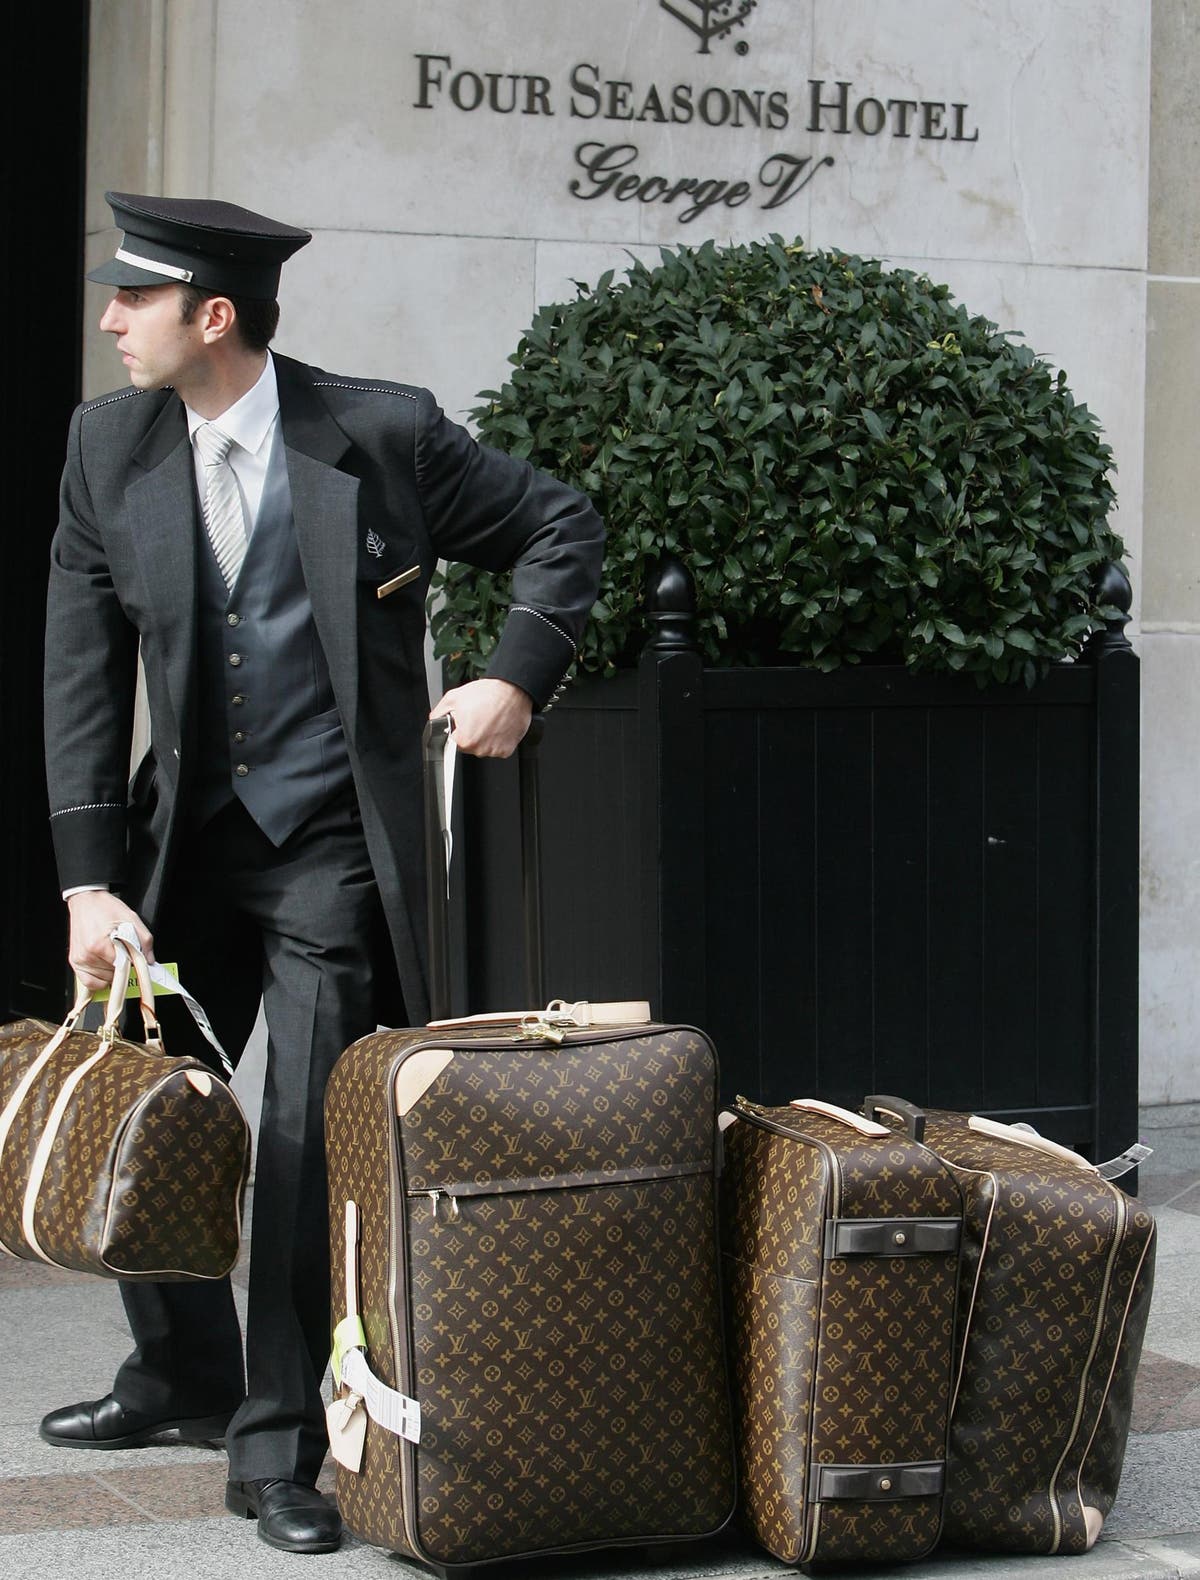 Louis Vuitton (Fashion Designer and Luggage Maker) - On This Day